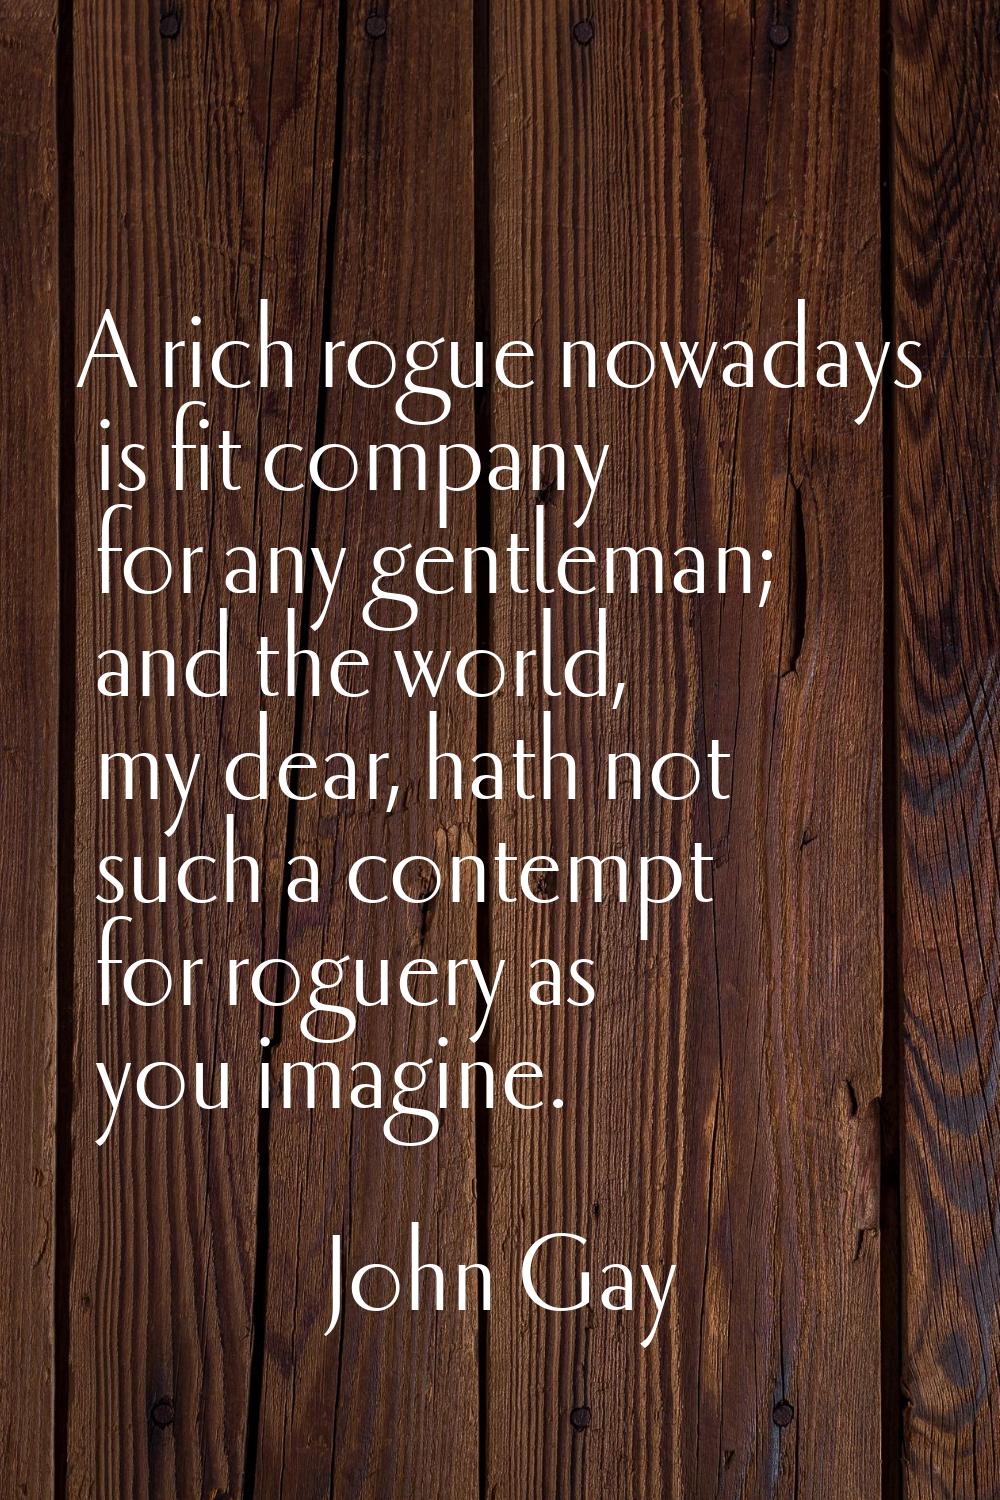 A rich rogue nowadays is fit company for any gentleman; and the world, my dear, hath not such a con